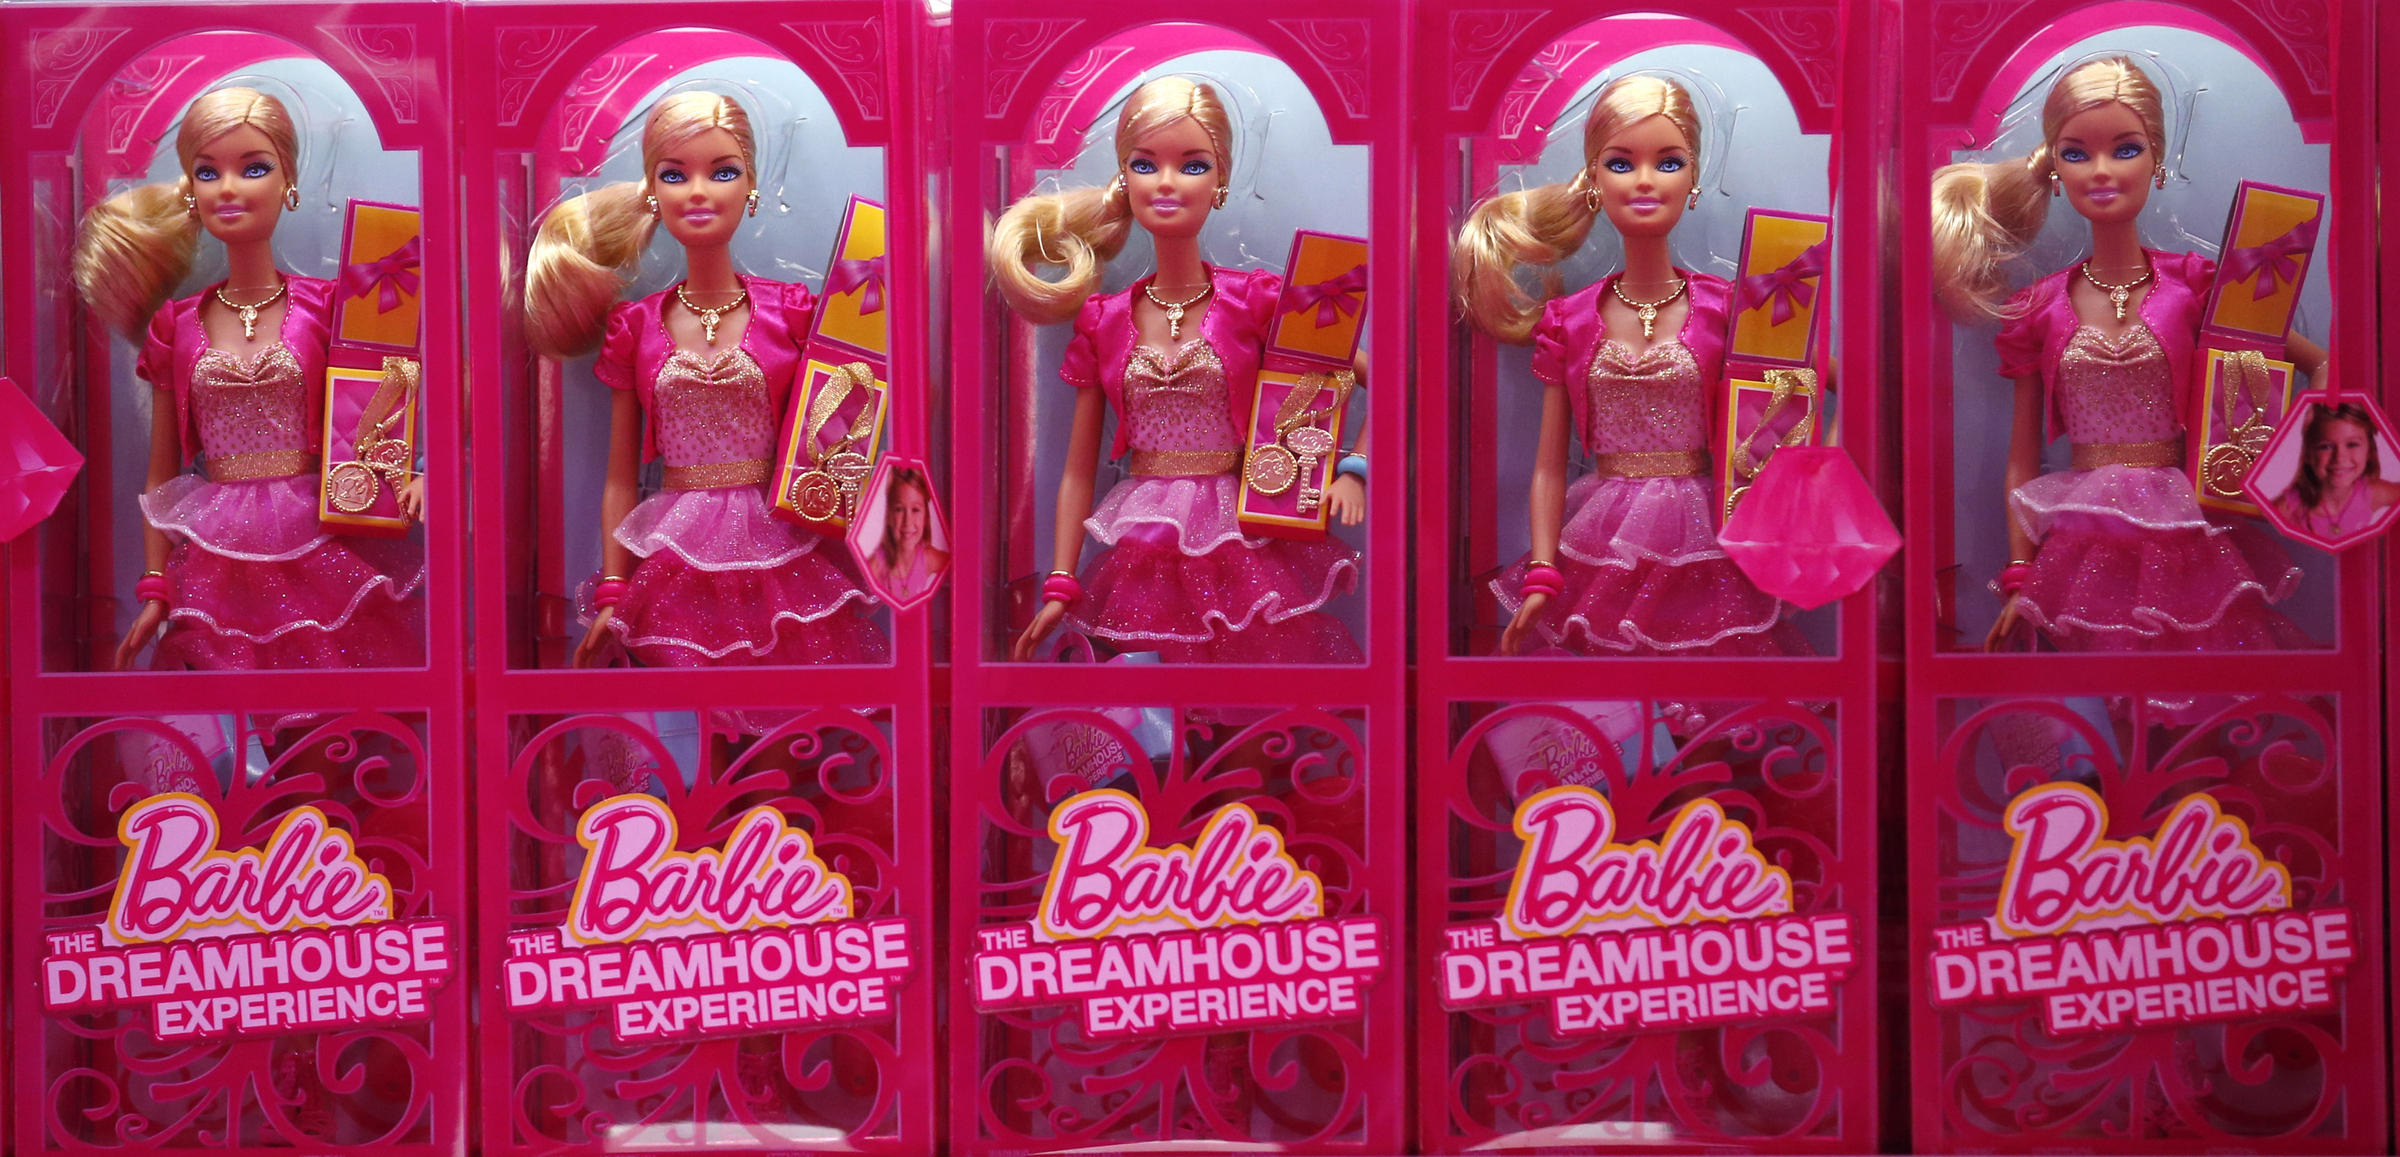 stores that sell barbies